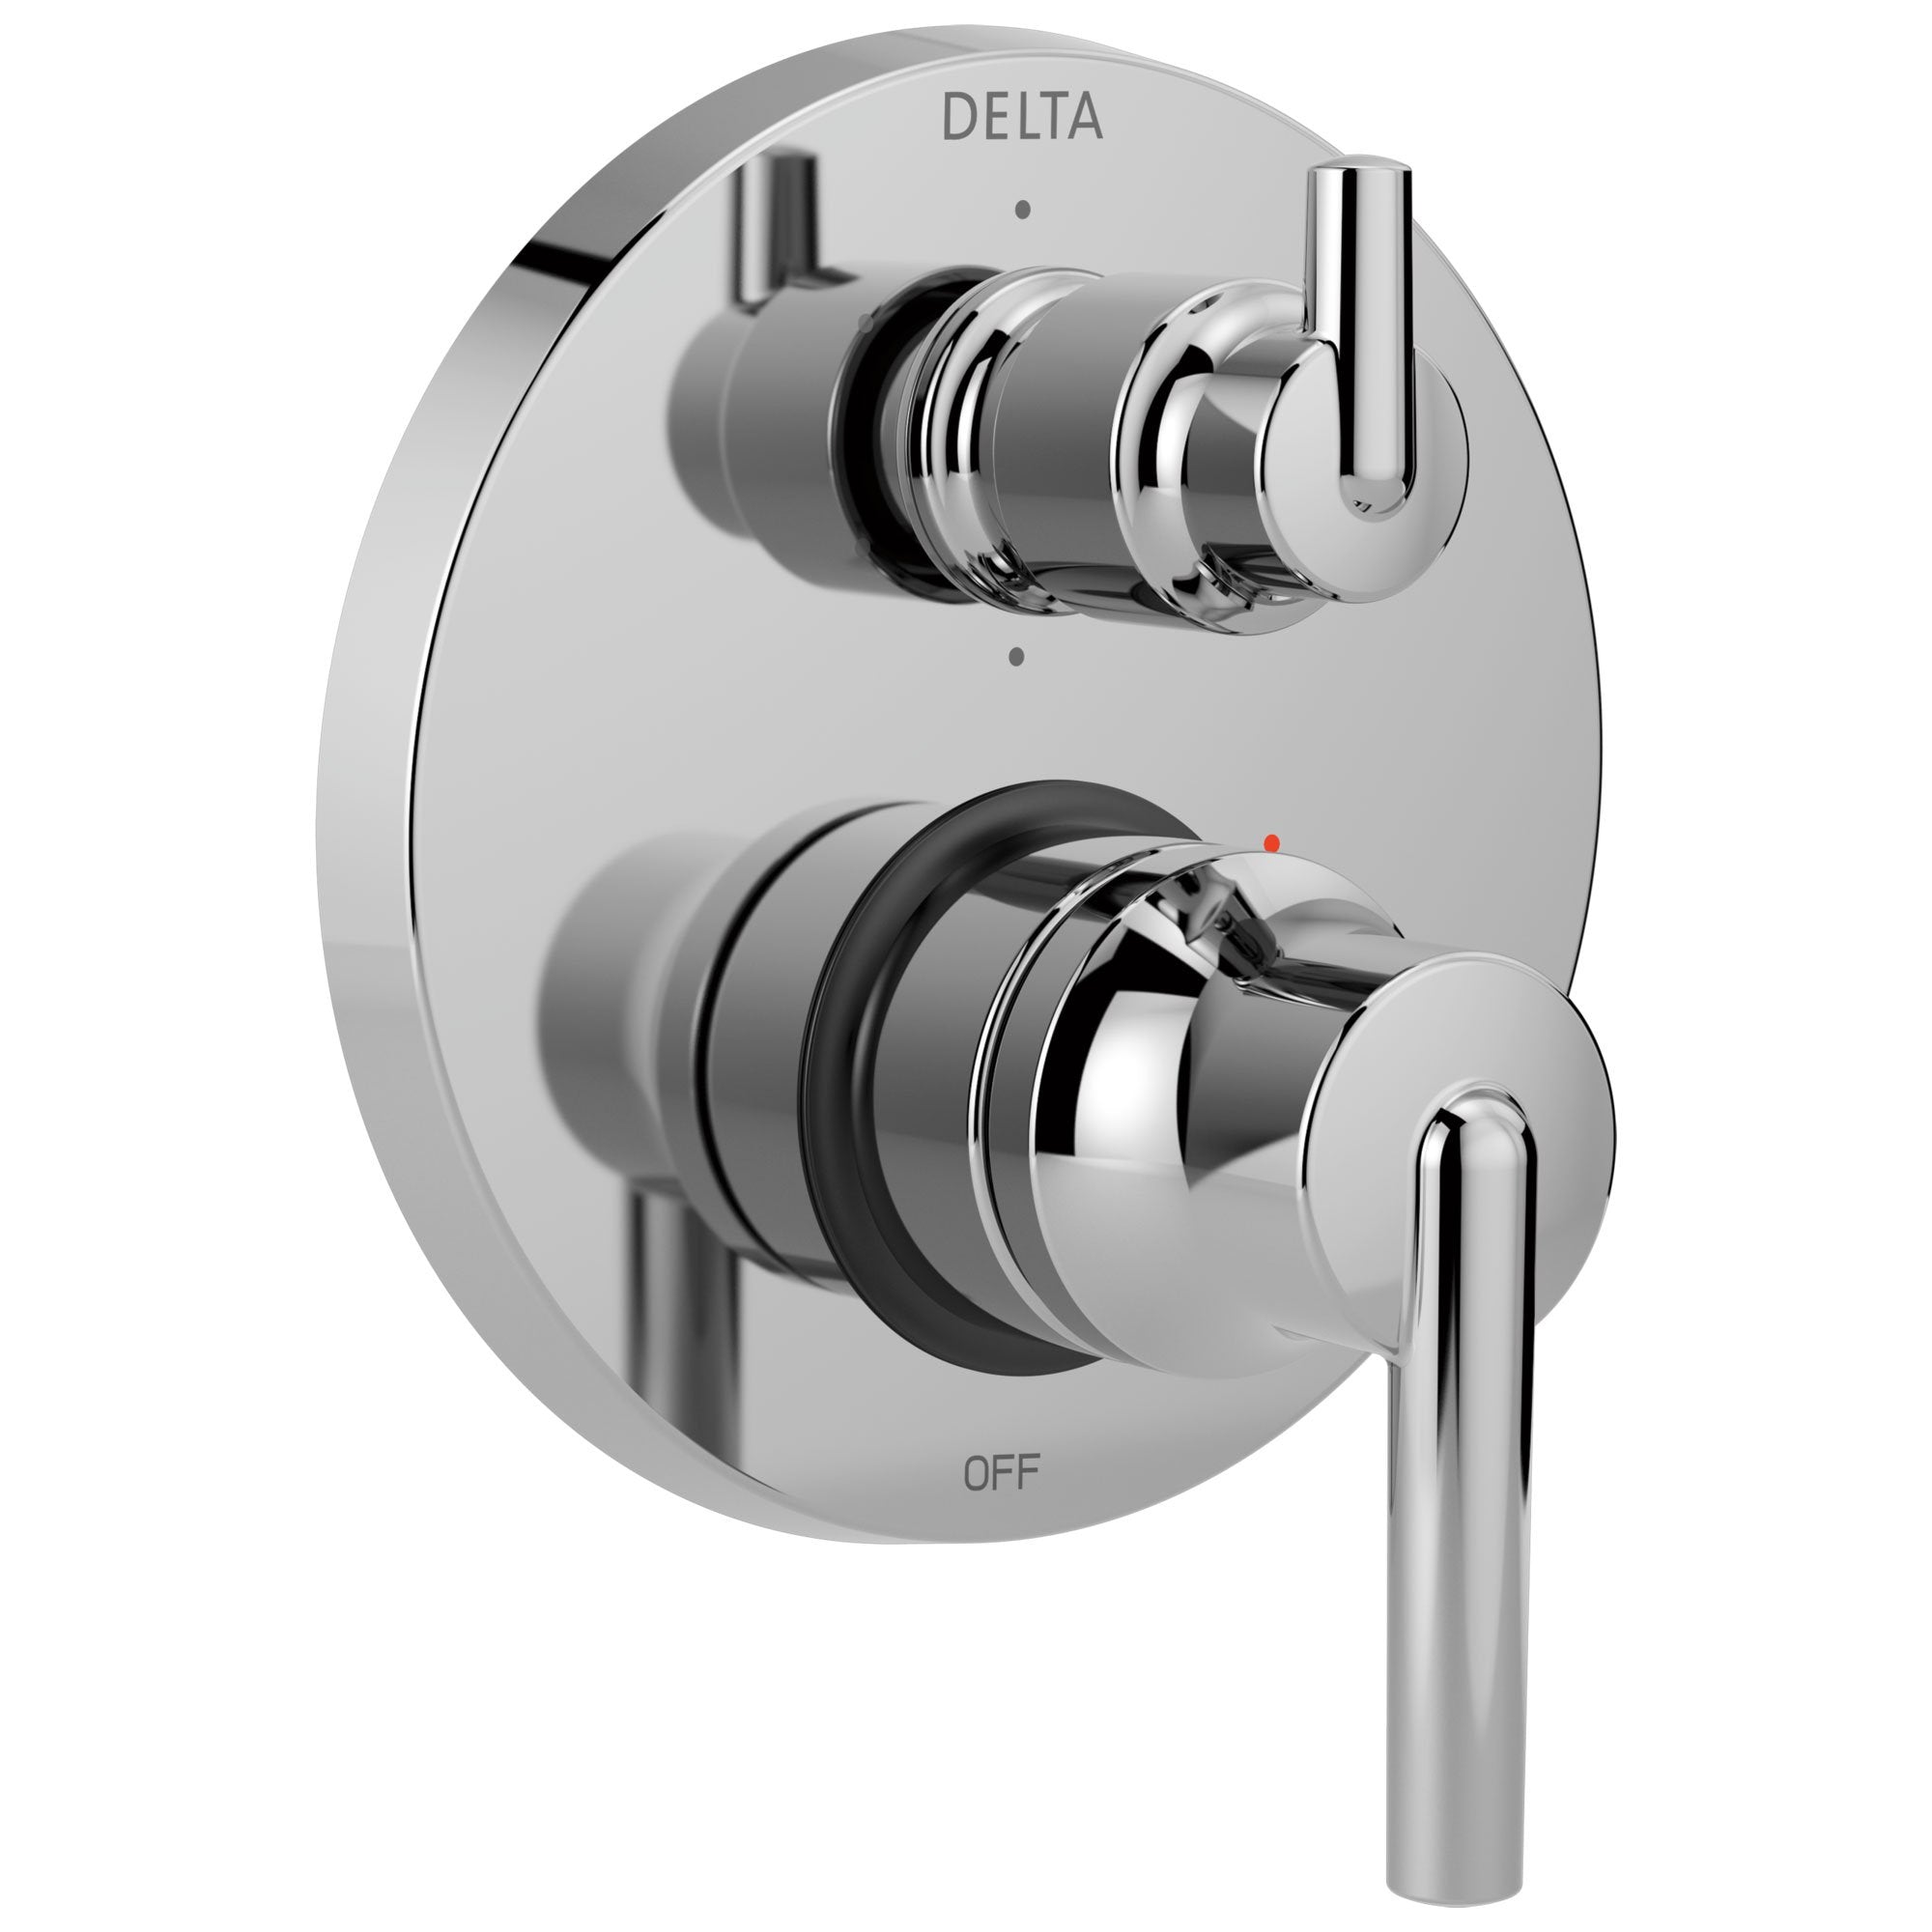 Delta Trinsic Chrome Contemporary Monitor 14 Shower Faucet Control Handle with 6-Setting Integrated Diverter Includes Trim Kit and Valve without Stops D2200V